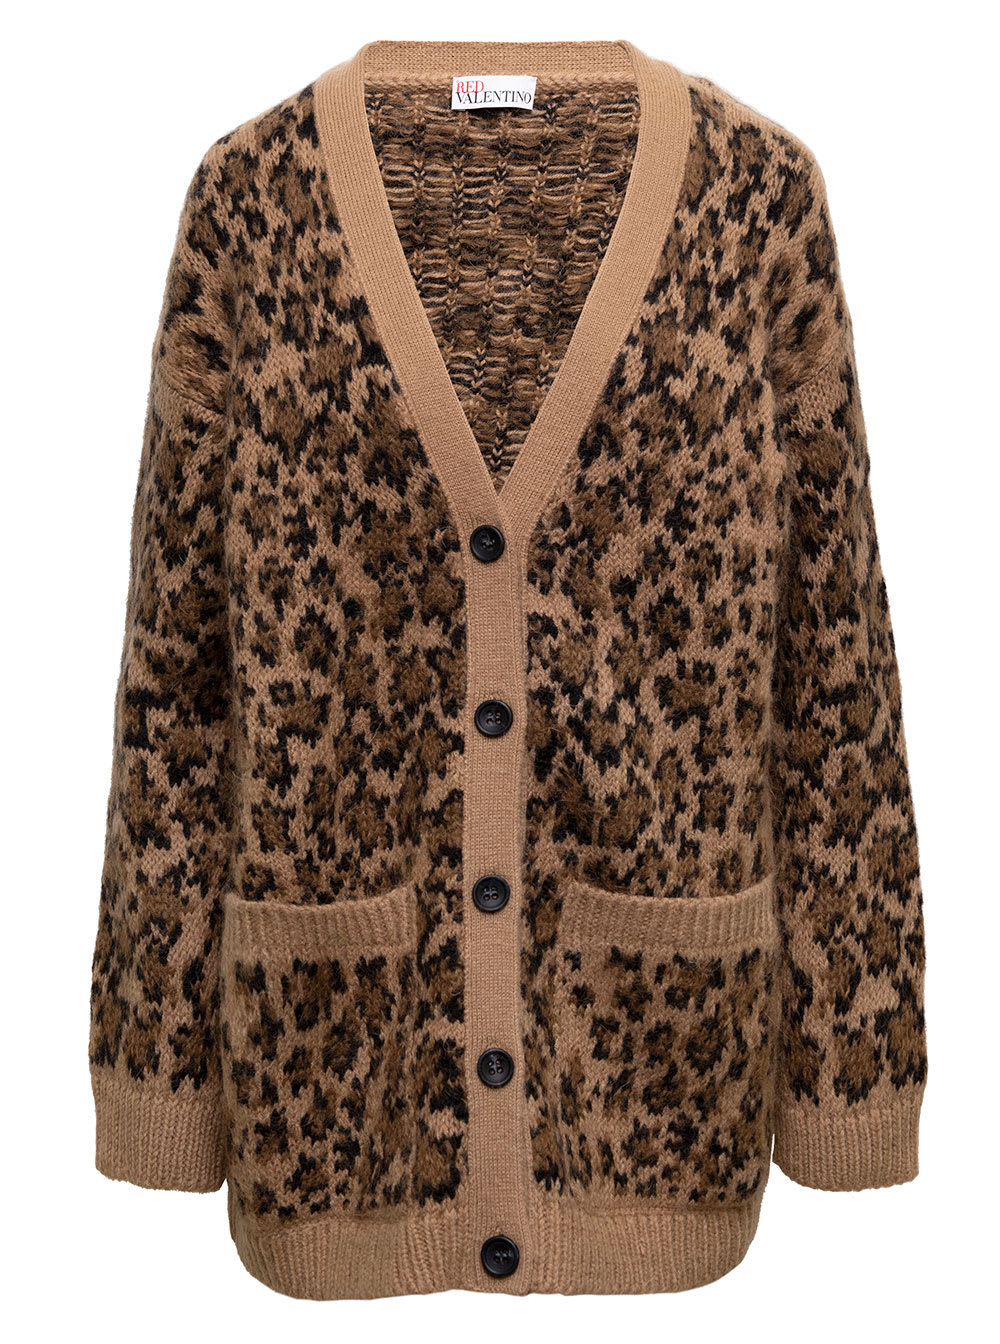 Beige And Brown Knit Cardigan With Leo Star Print Woman Red Valentino